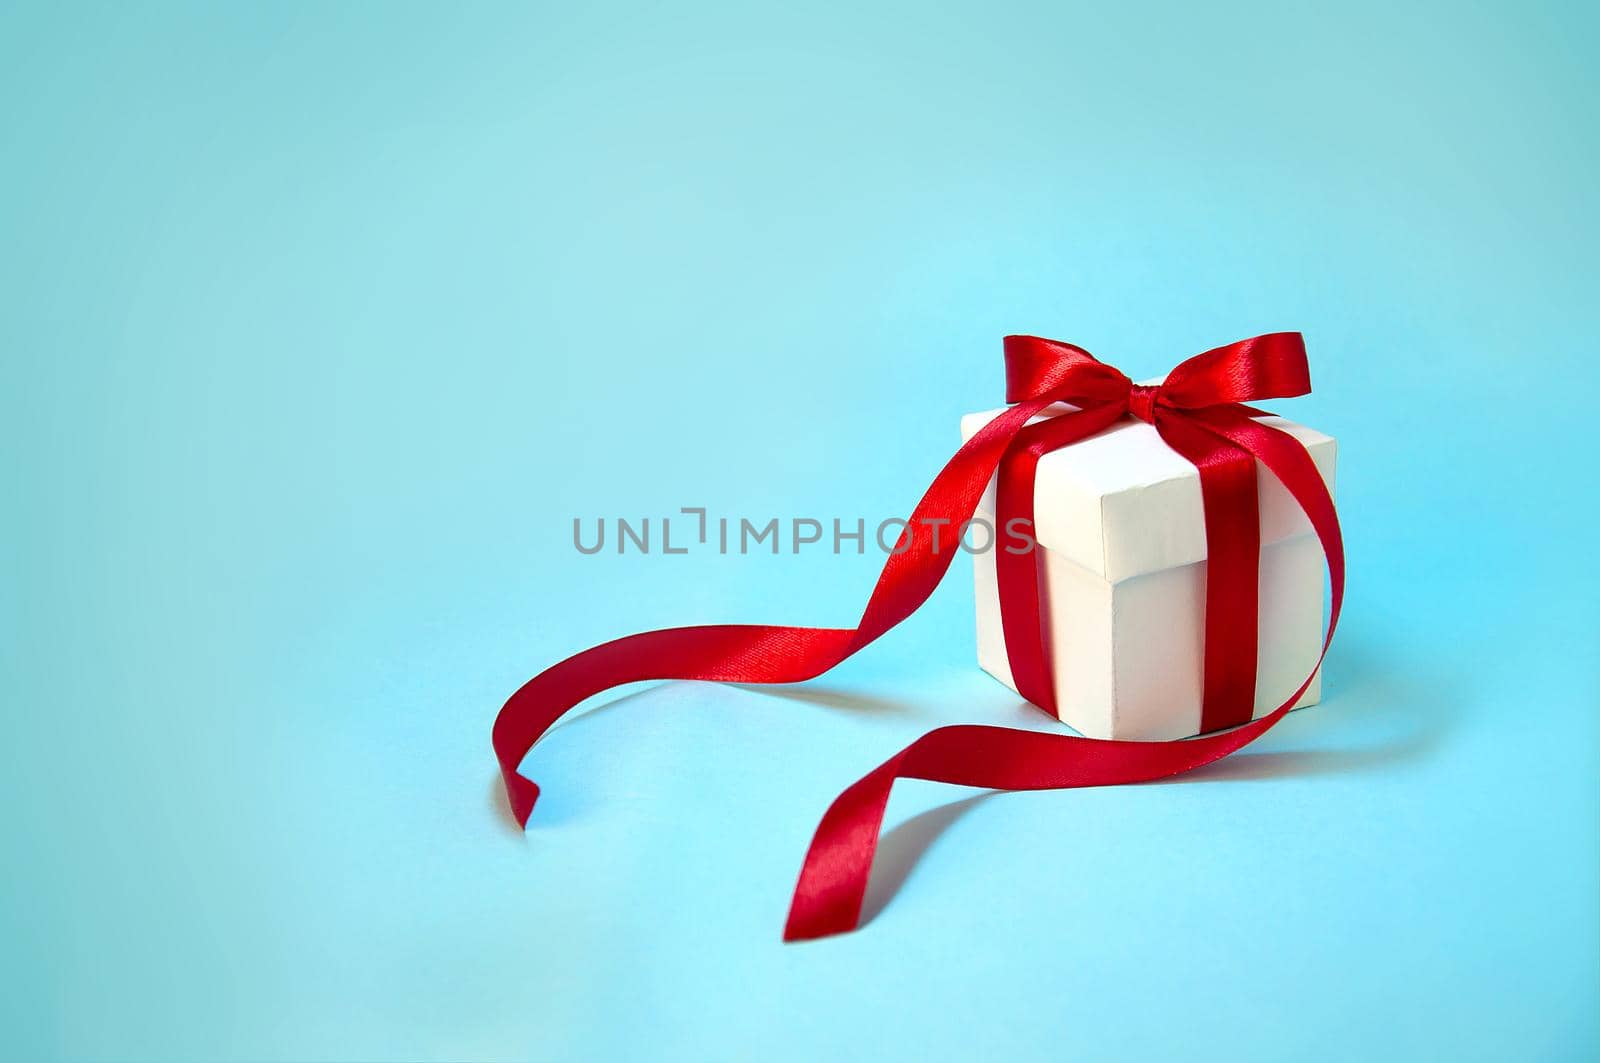 Christmas Gift's in White Box with Red Ribbon on Light Blue Background. New Year Holiday Composition. Copy Space by Svetlana_Belozerova